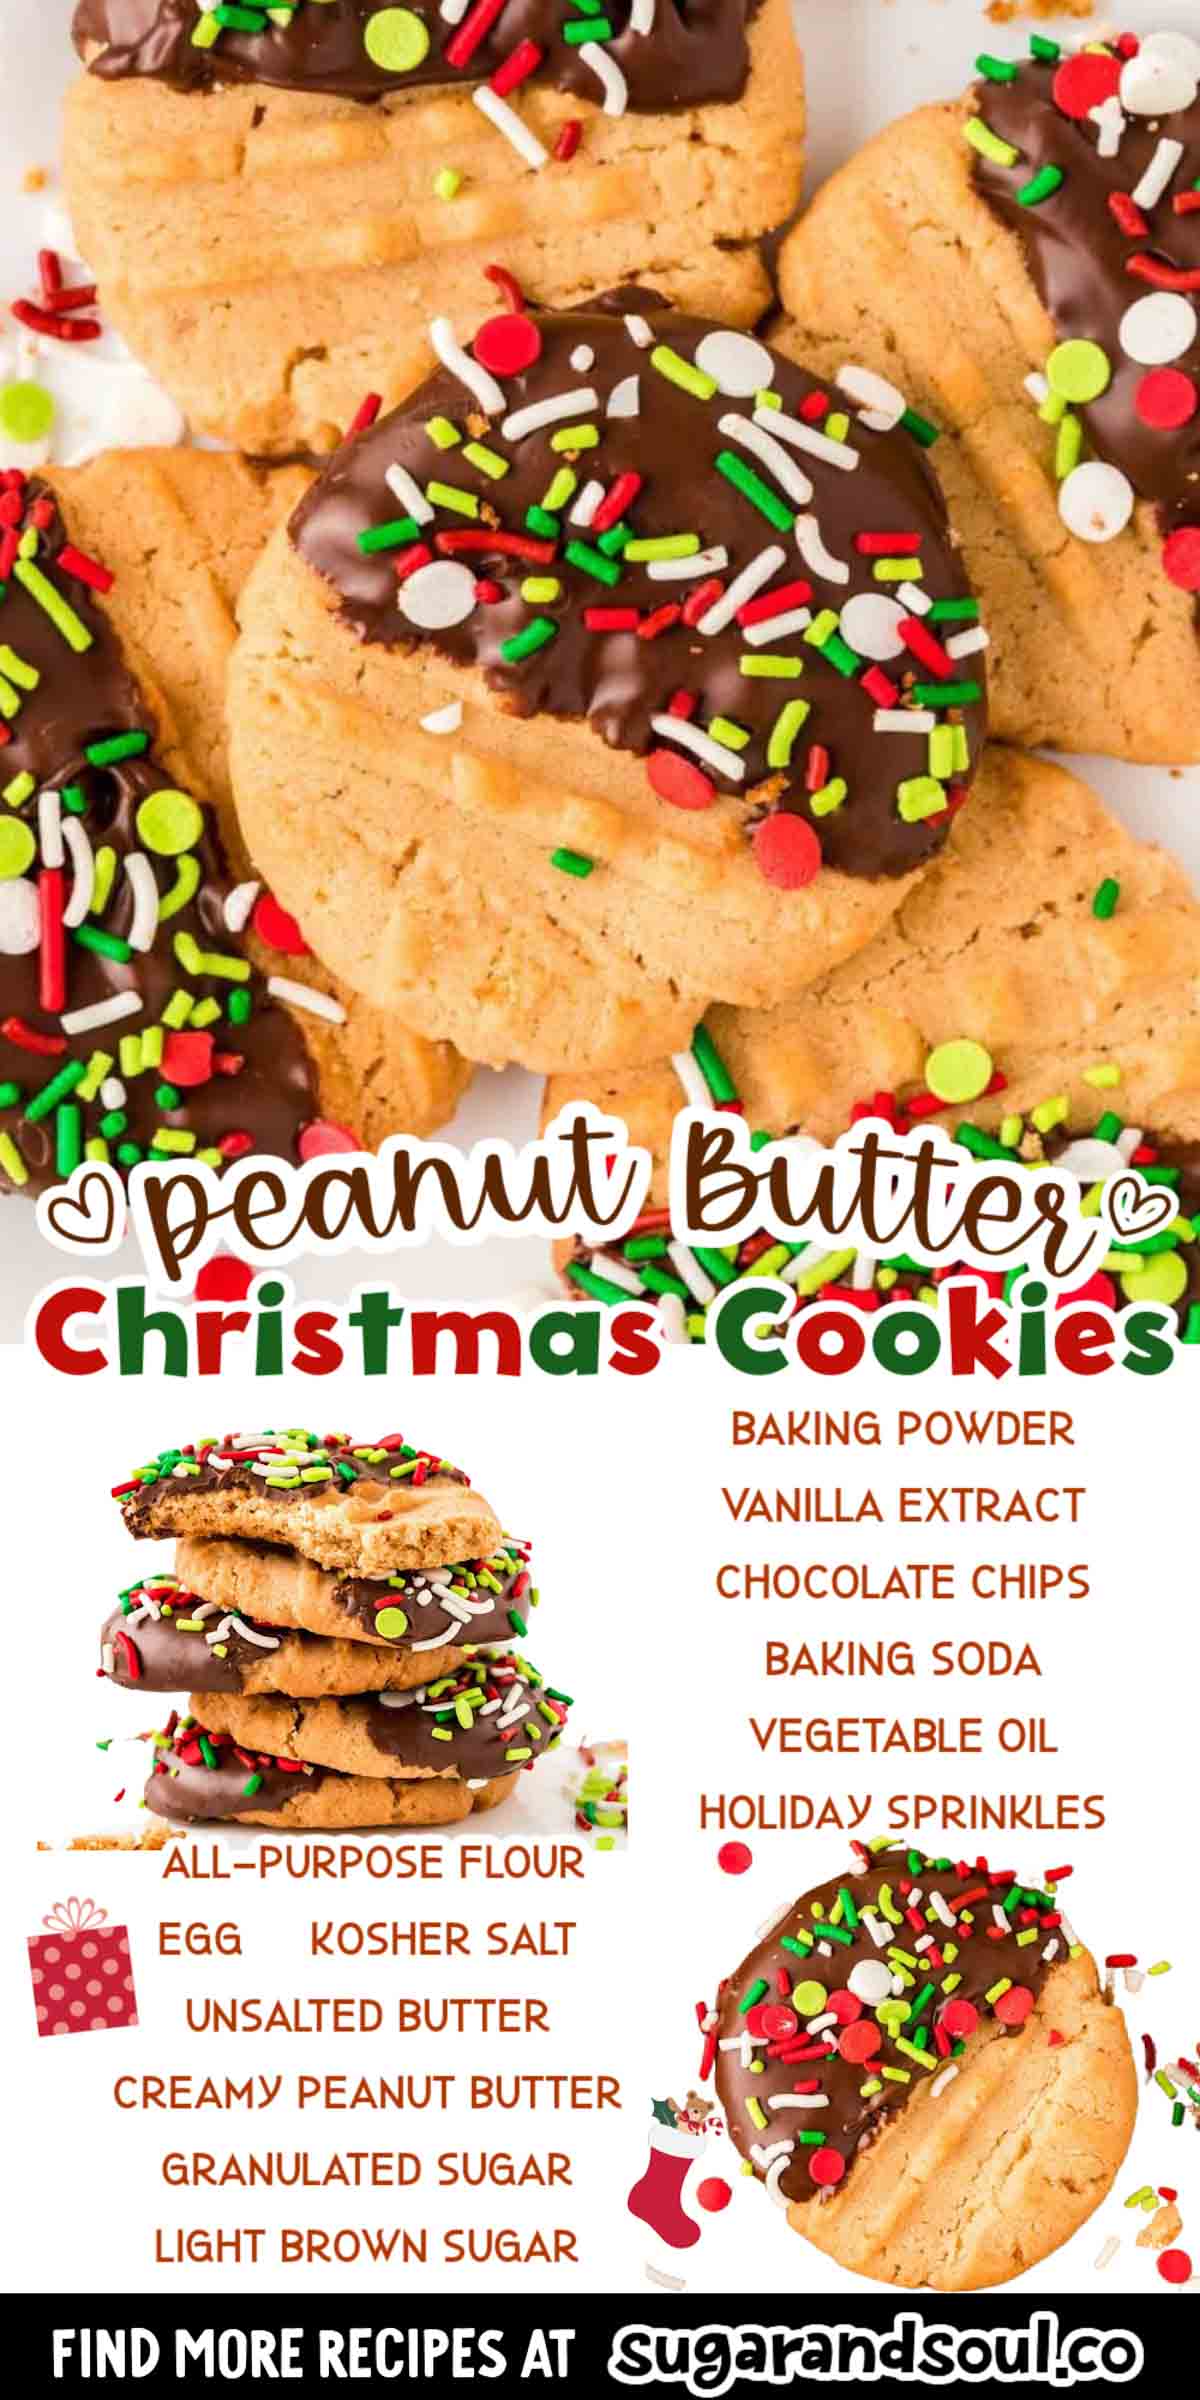 Peanut Butter Christmas Cookies are an easy-to-make holiday treat that creates a sweet, peanut-buttery cookie with a chocolate dip and sprinkles! Each batch takes just 12 minutes to bake! via @sugarandsoulco